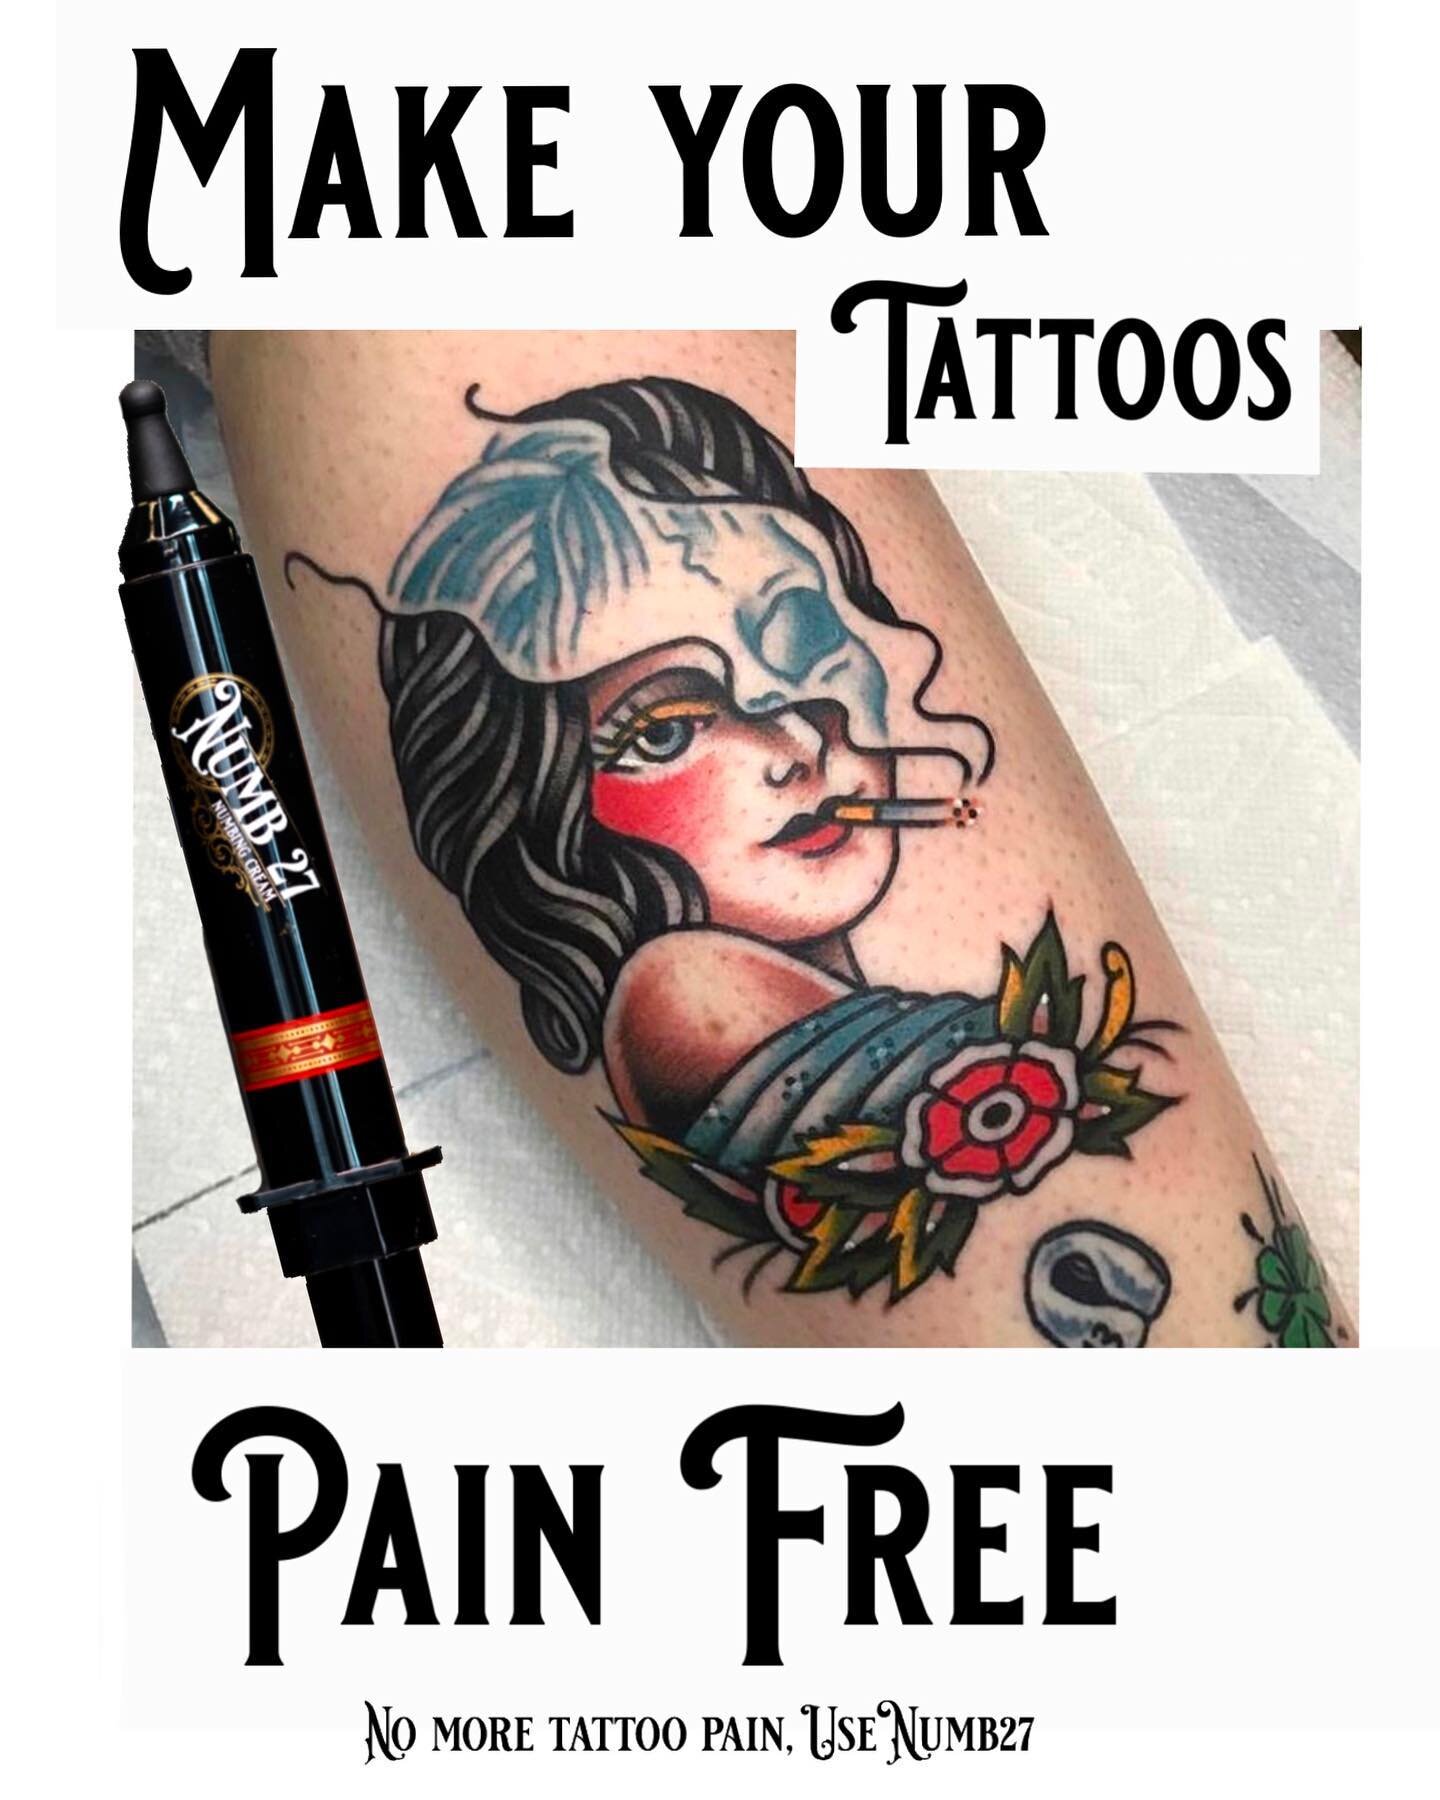 Numb27 Tattoo Numbing Cream Prides itself by being the highest quality professional grade Tattoo Numbing cream you can buy!!! We want your tattoo experience to be as clean and nice as this tattoo 😉

Go order on Numb27.com

#numb27 #numbingcream #tat